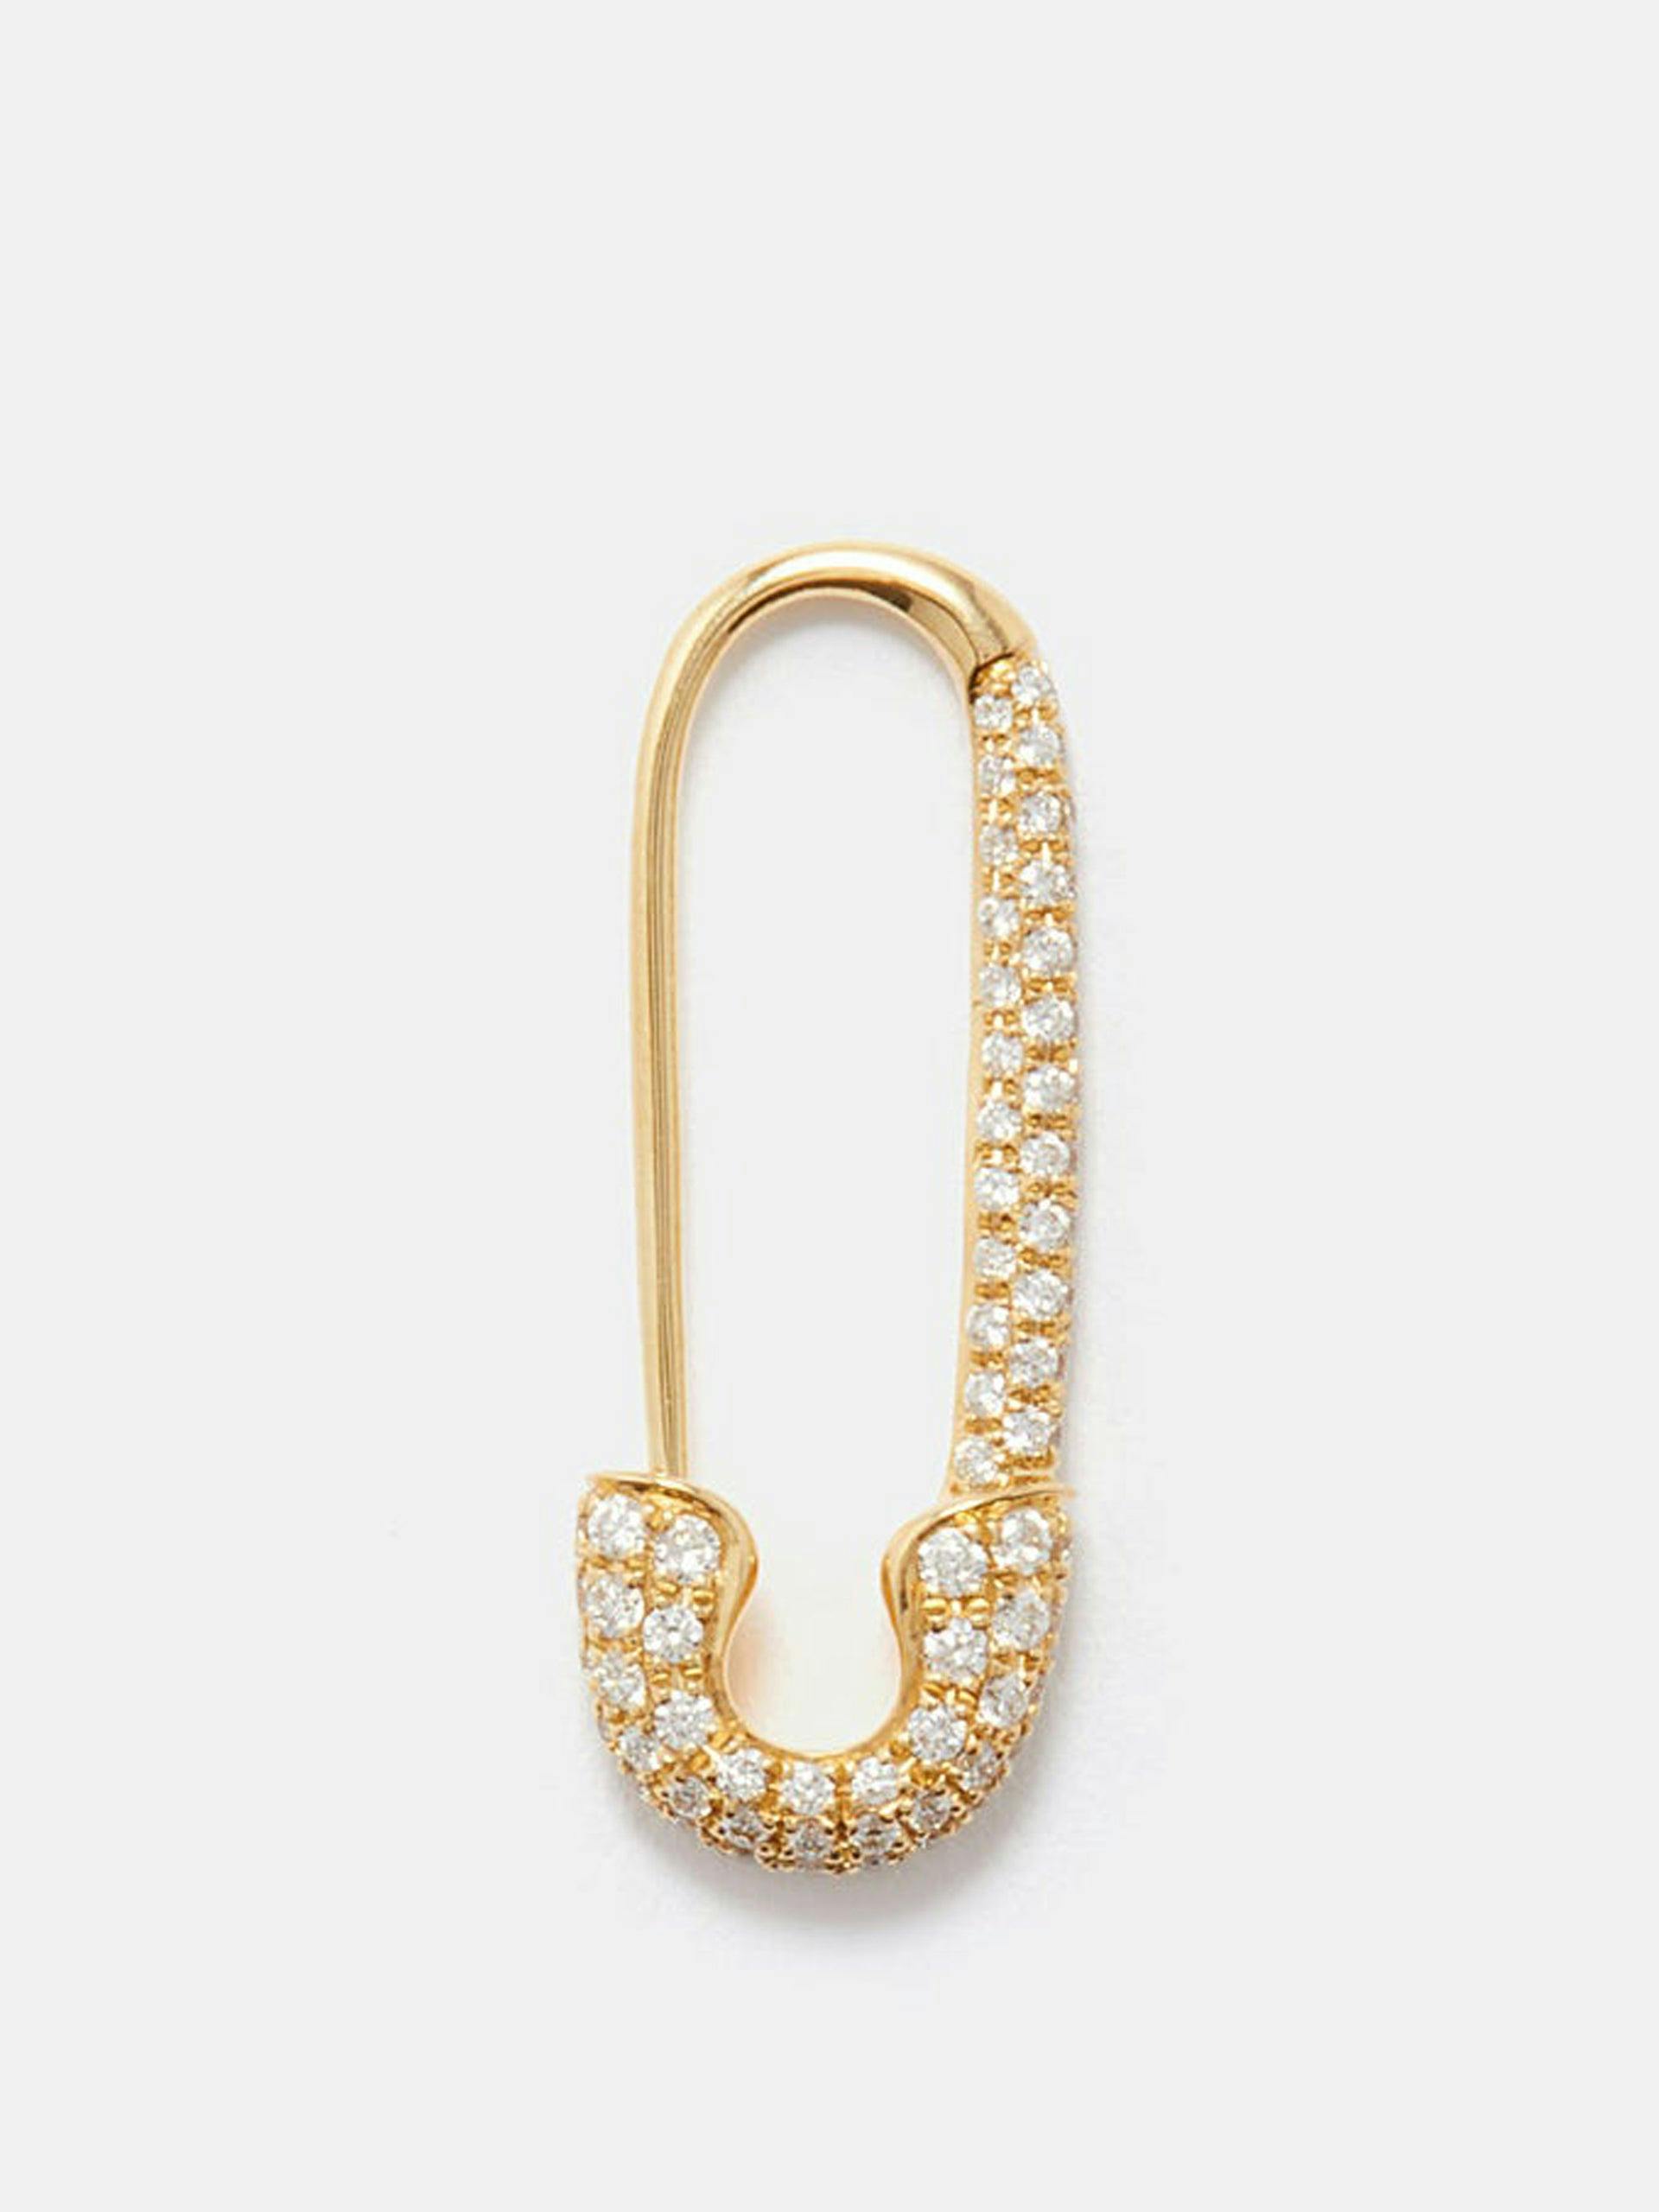 Safety pin gold single earring